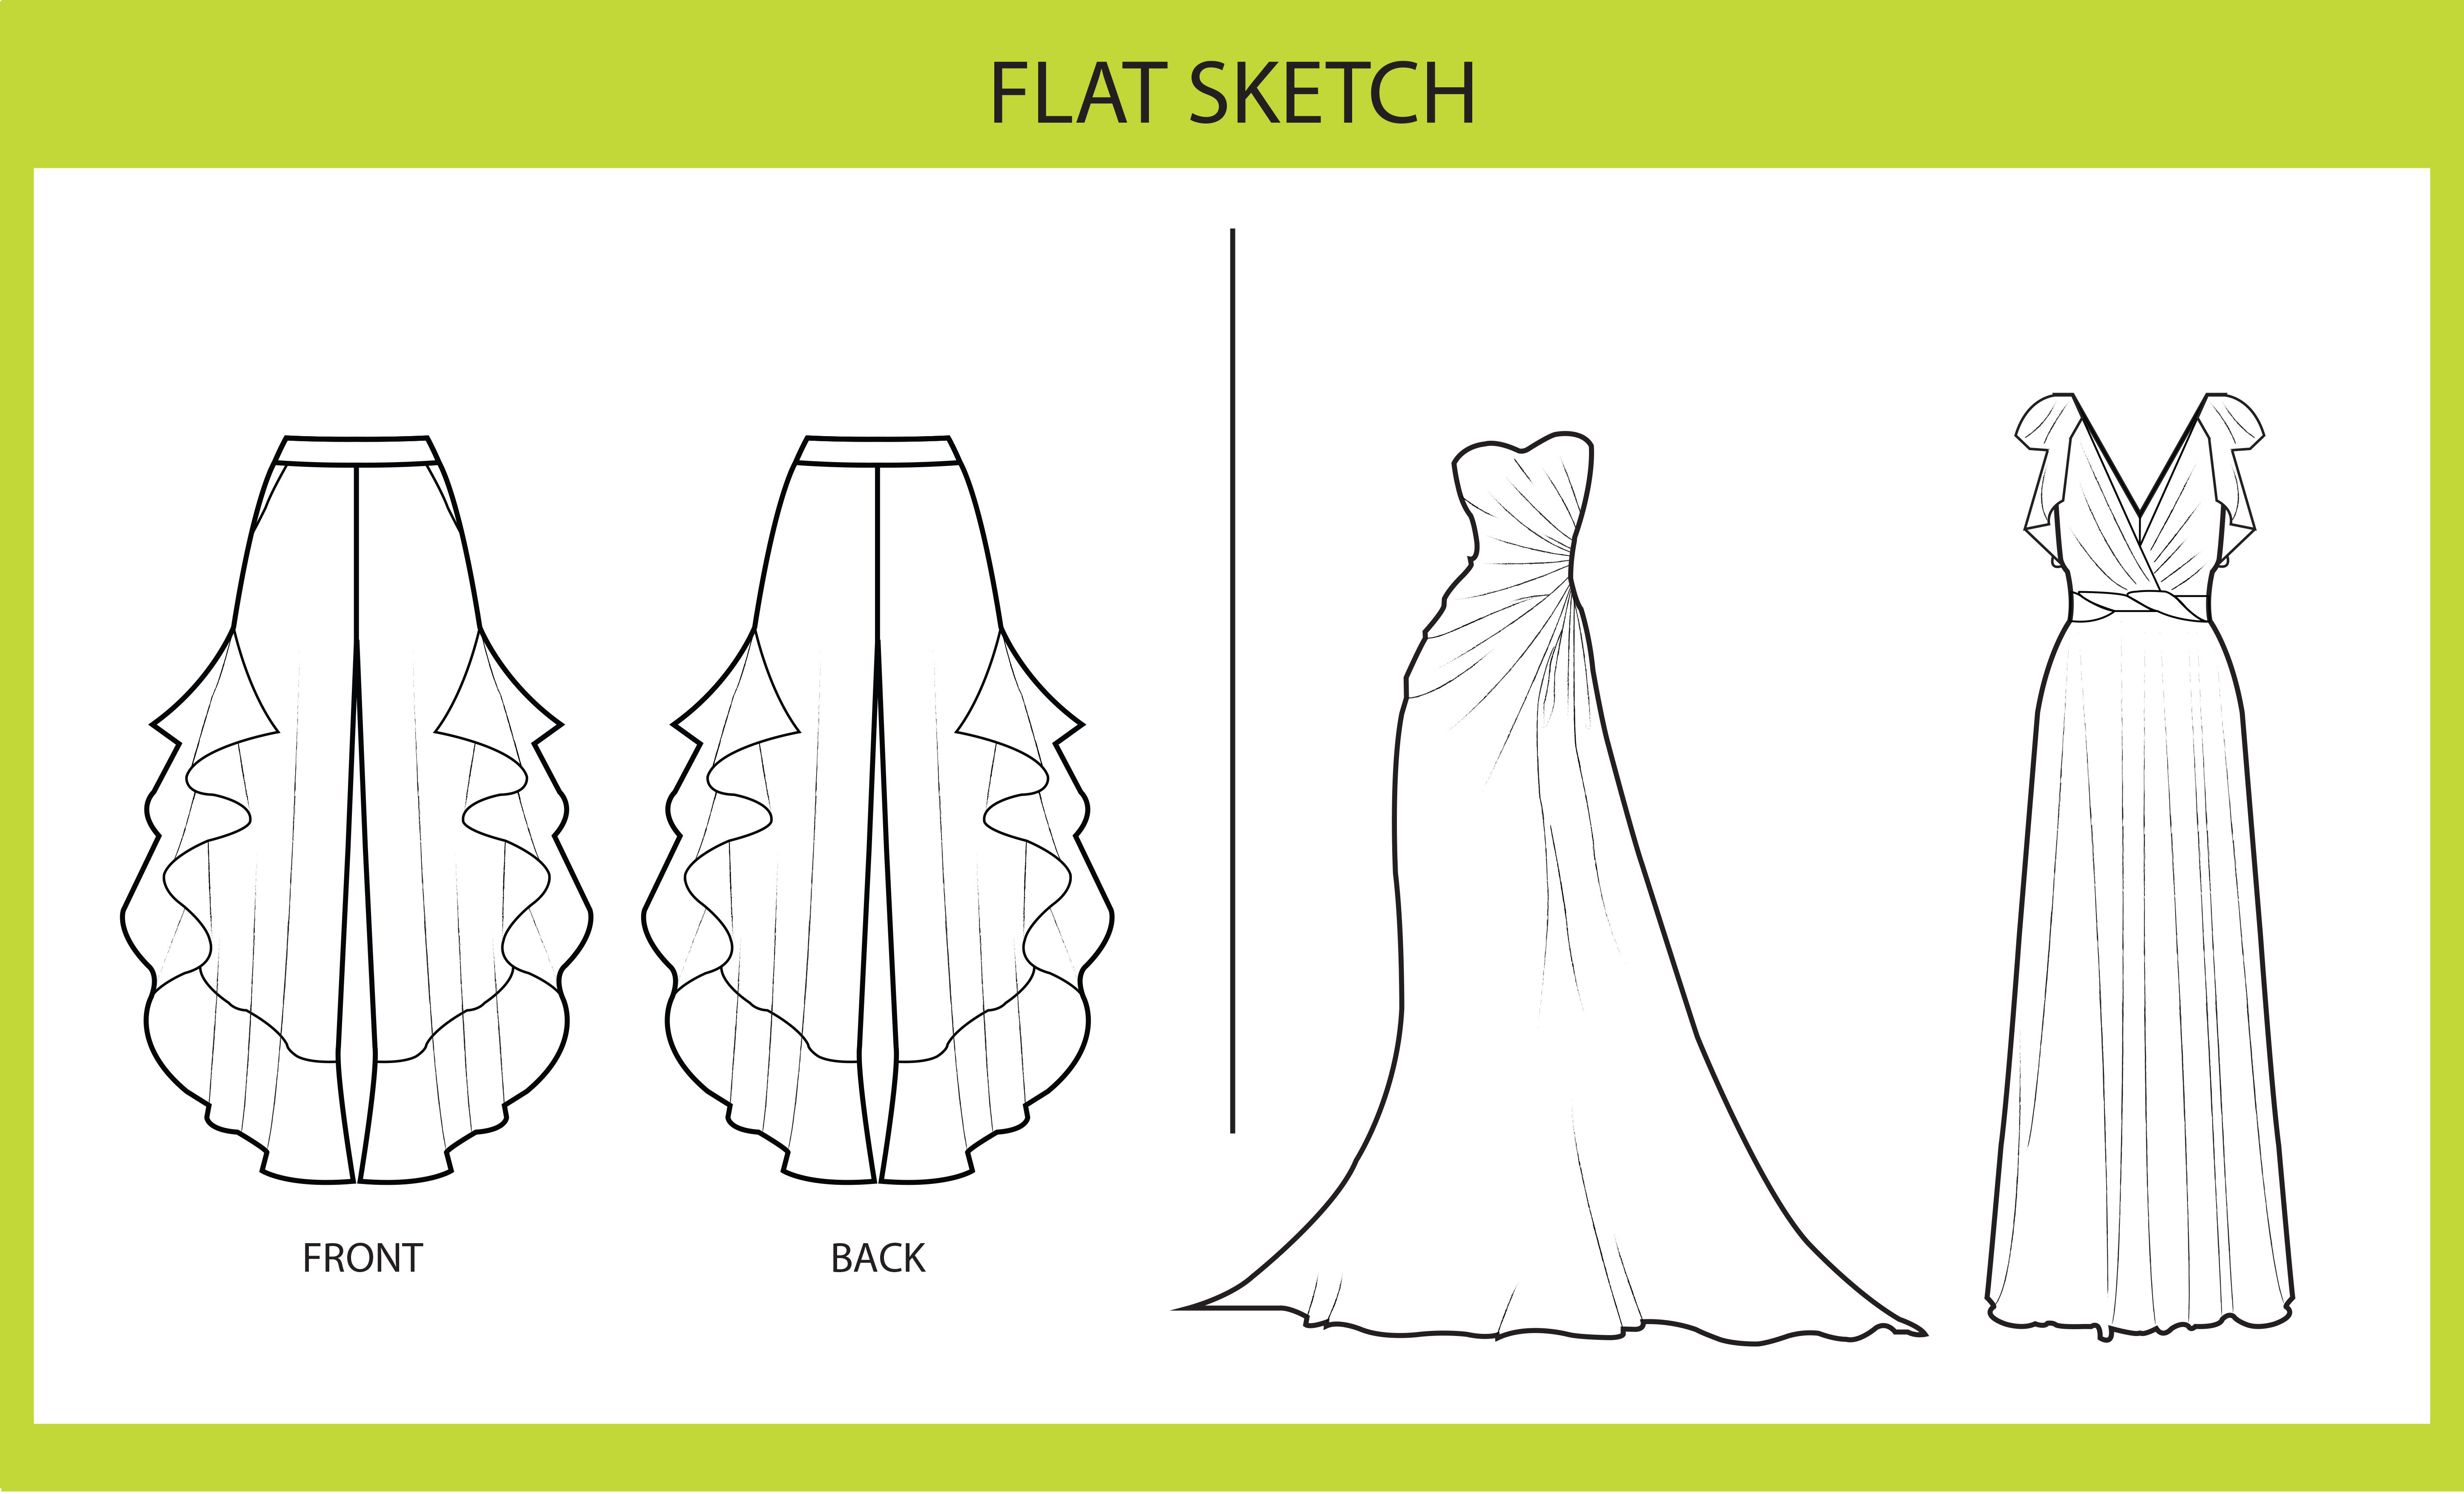 FREE Tutorial: How to Draw Fashion Flats in Illustrator (In 20 Mins!)